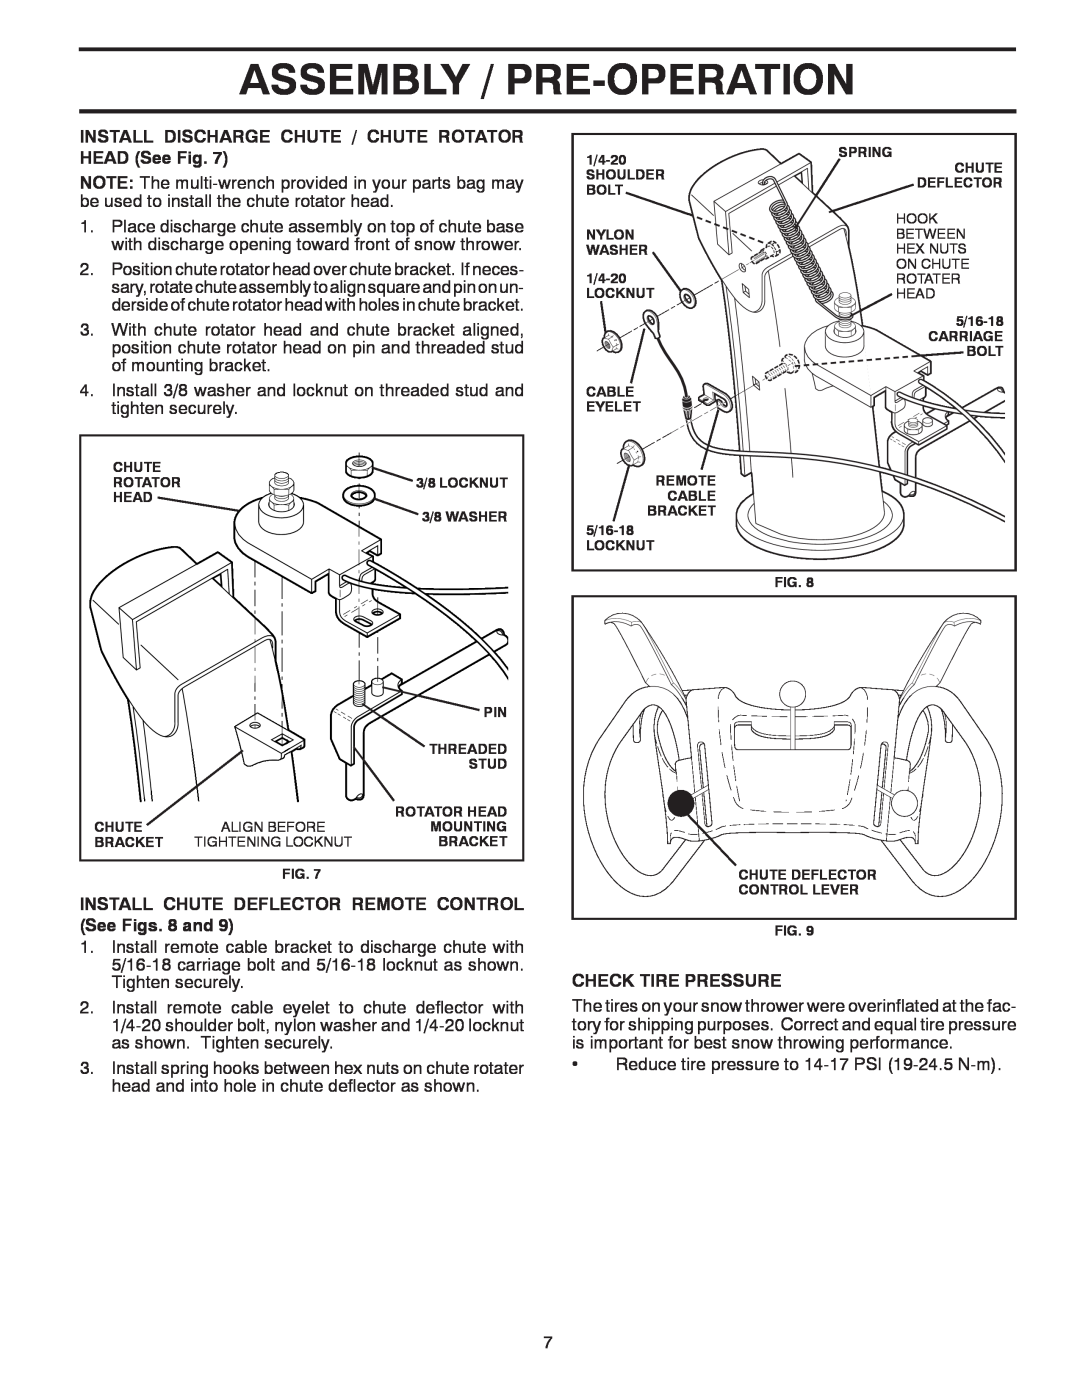 Poulan 415153 Assembly / Pre-Operation, INSTALL DISCHARGE CHUTE / CHUTE ROTATOR HEAD See Fig, Check Tire Pressure 